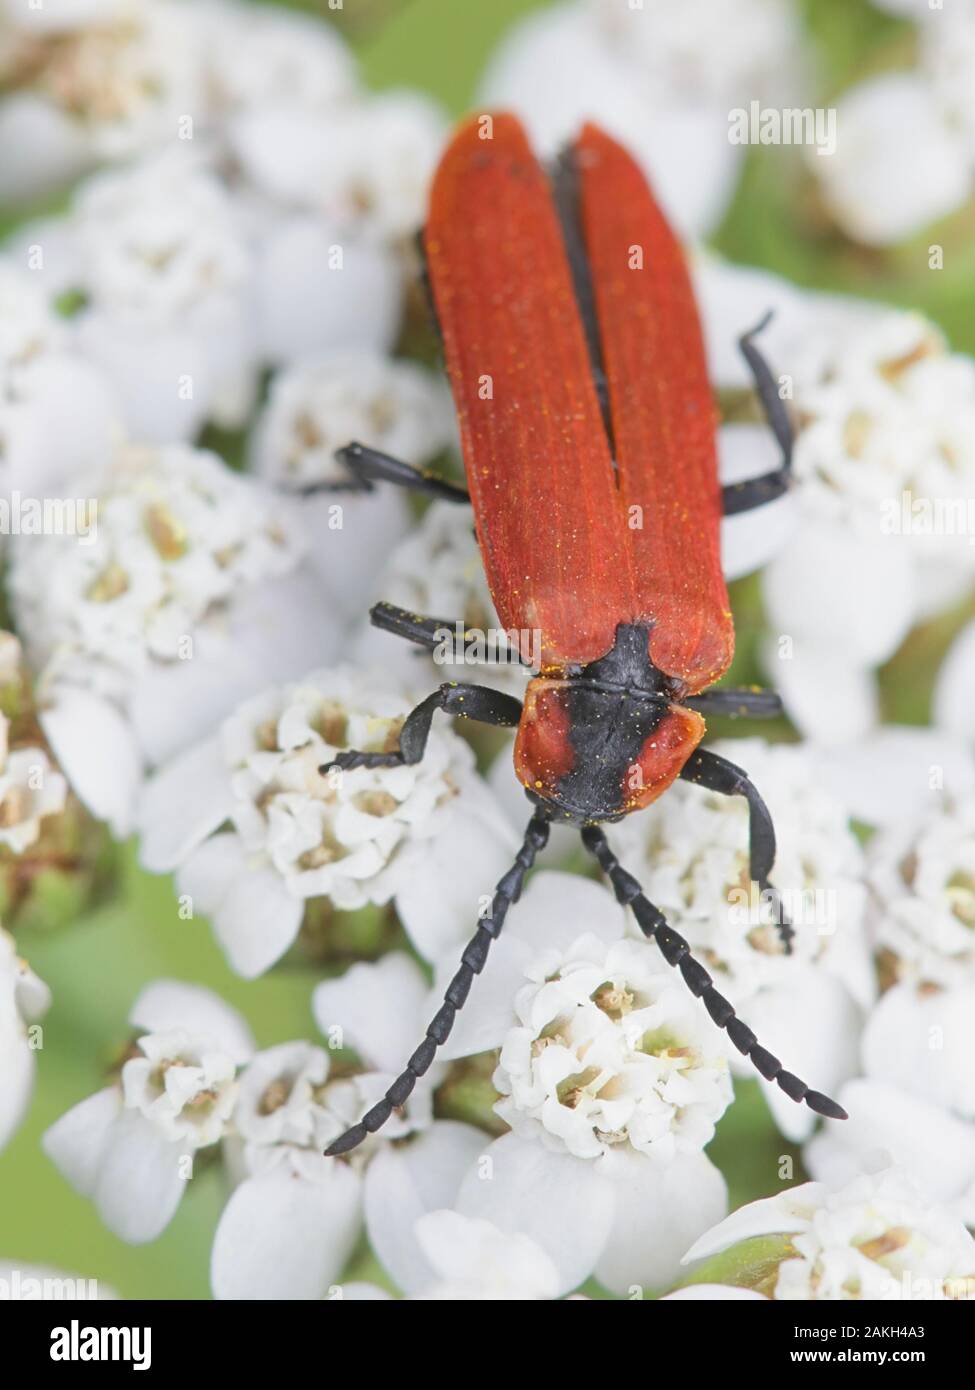 Lygistopterus sanguineus, a red net-winged beetle from Finland feeding on yarrow Stock Photo